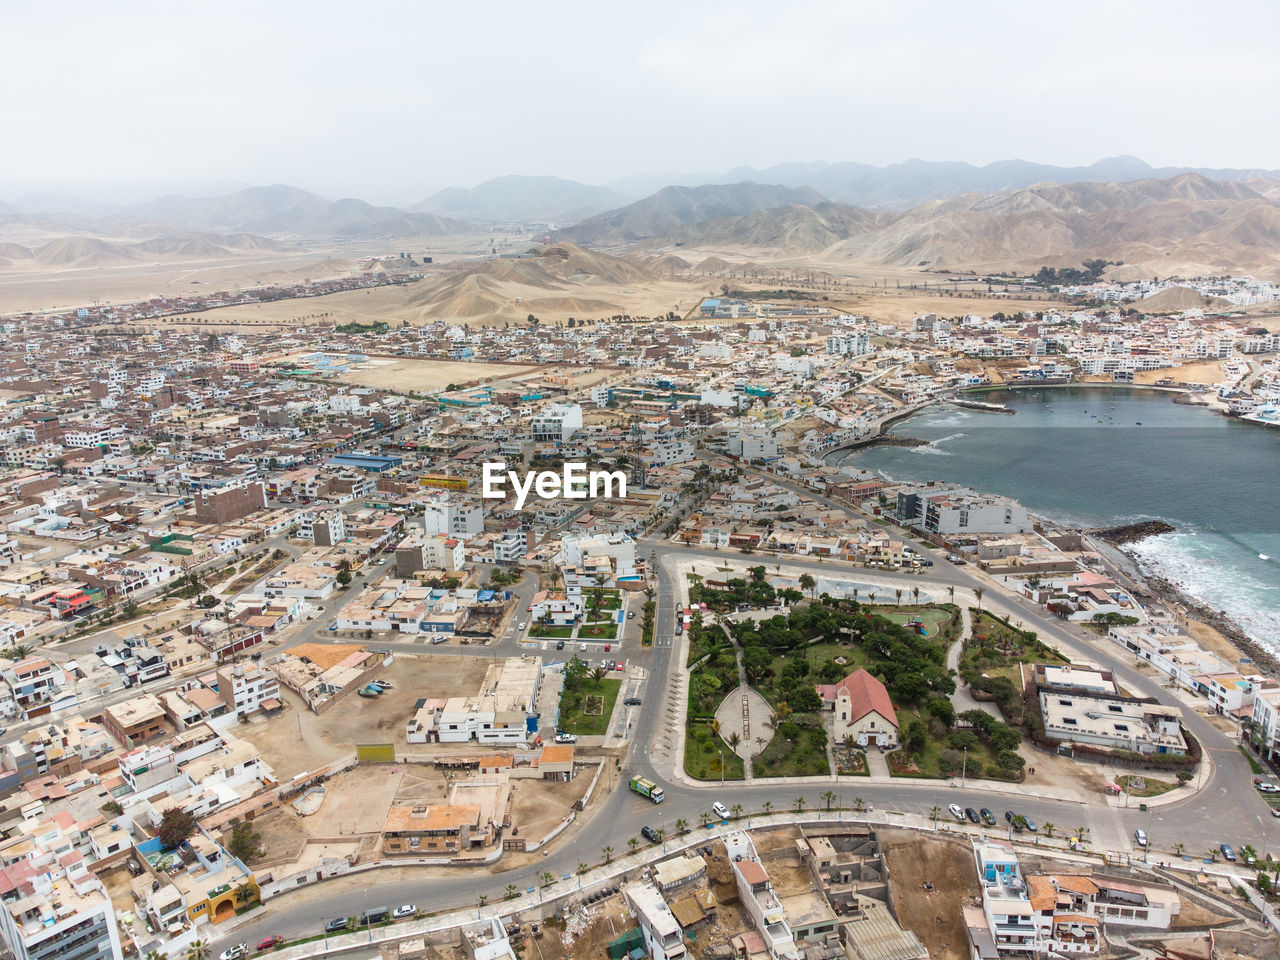 Aerial drone view of the district of san bartolo located south of lima - peru